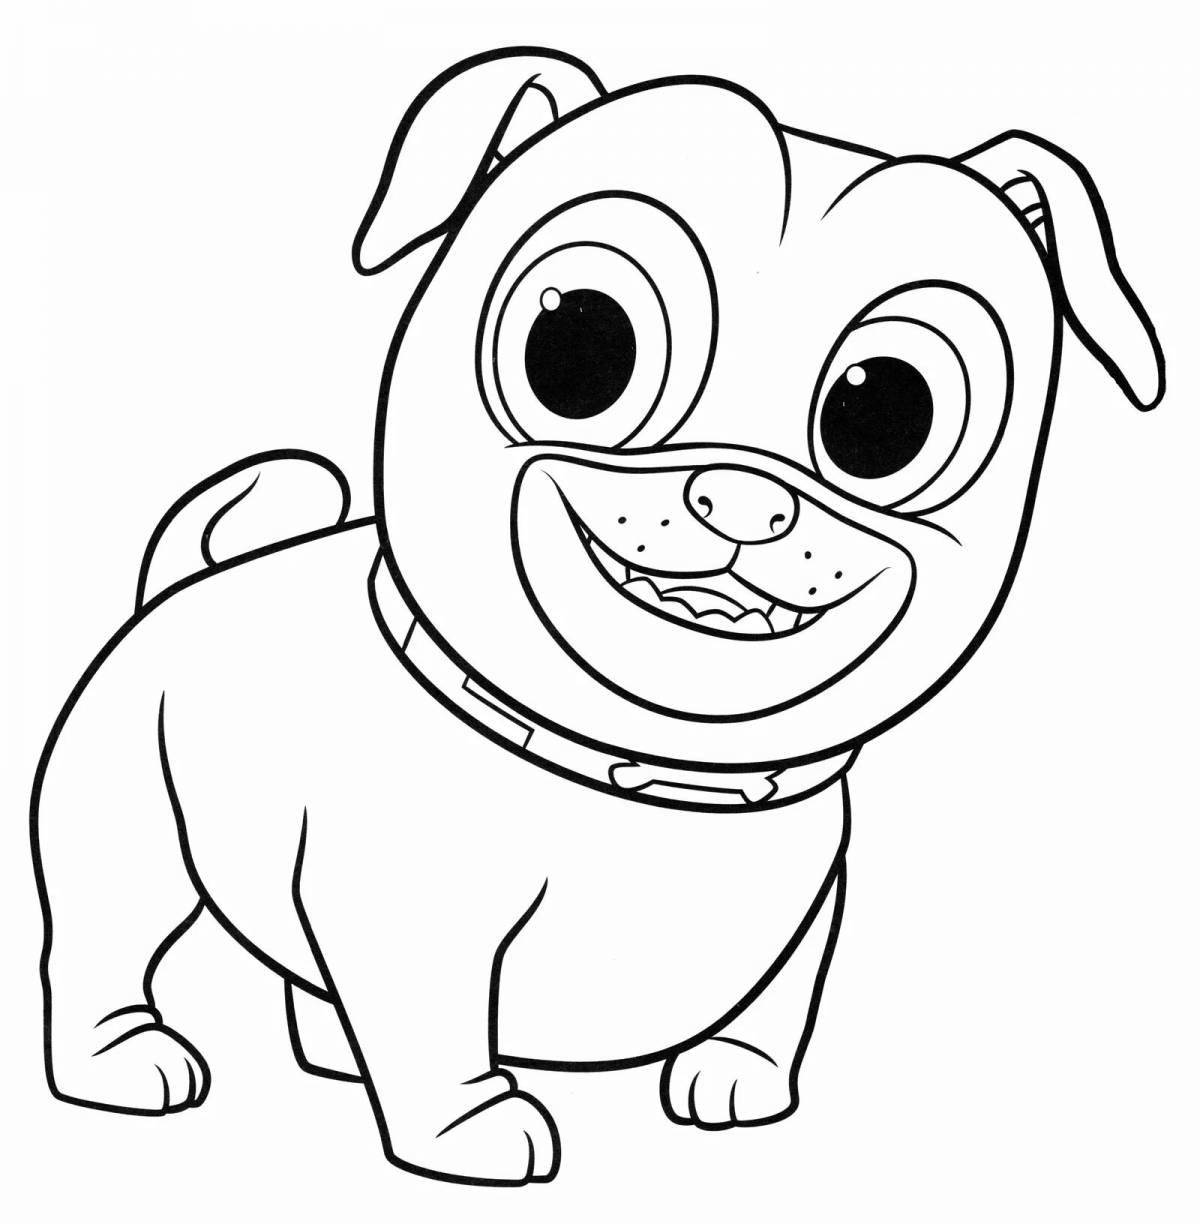 Color-spectacular bingo and roles coloring page